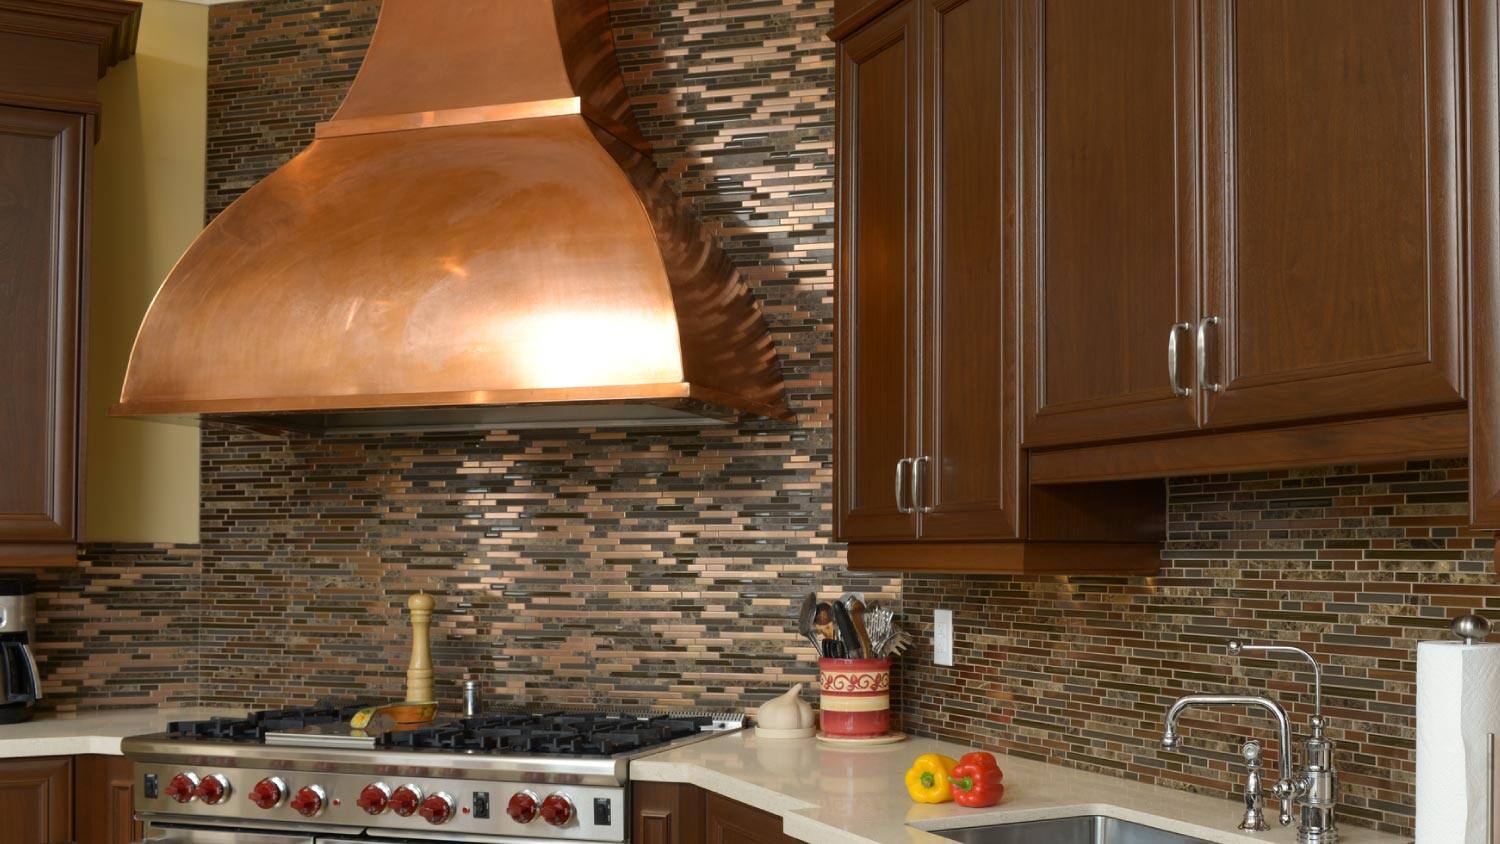 A Complete Guide To Cleaning A Copper Range Hood